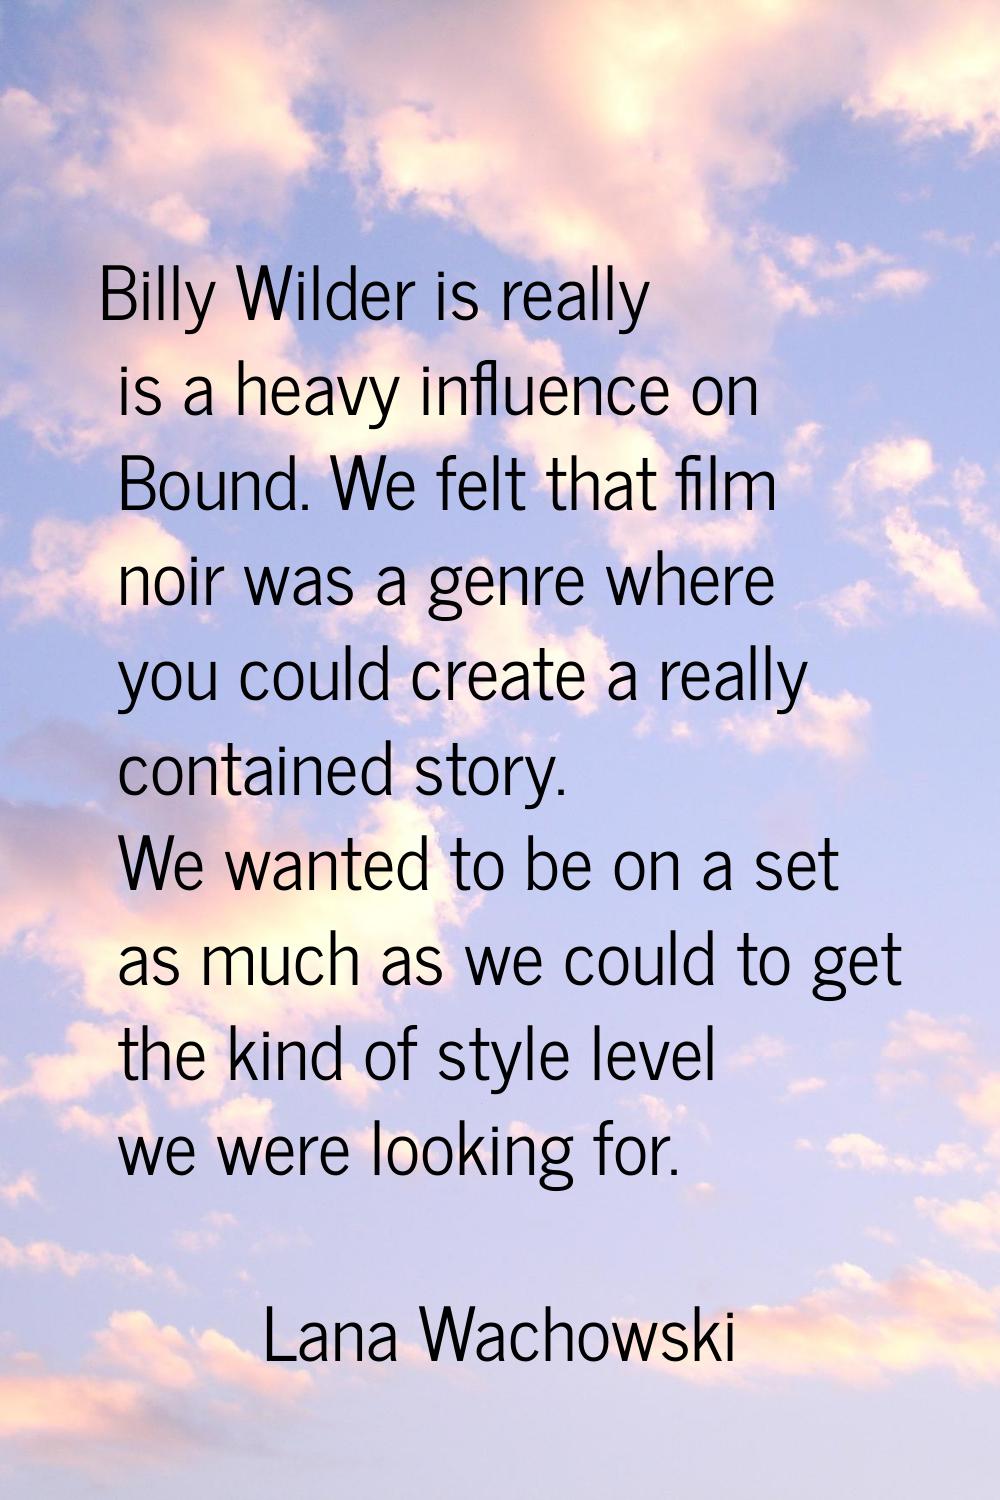 Billy Wilder is really is a heavy influence on Bound. We felt that film noir was a genre where you 